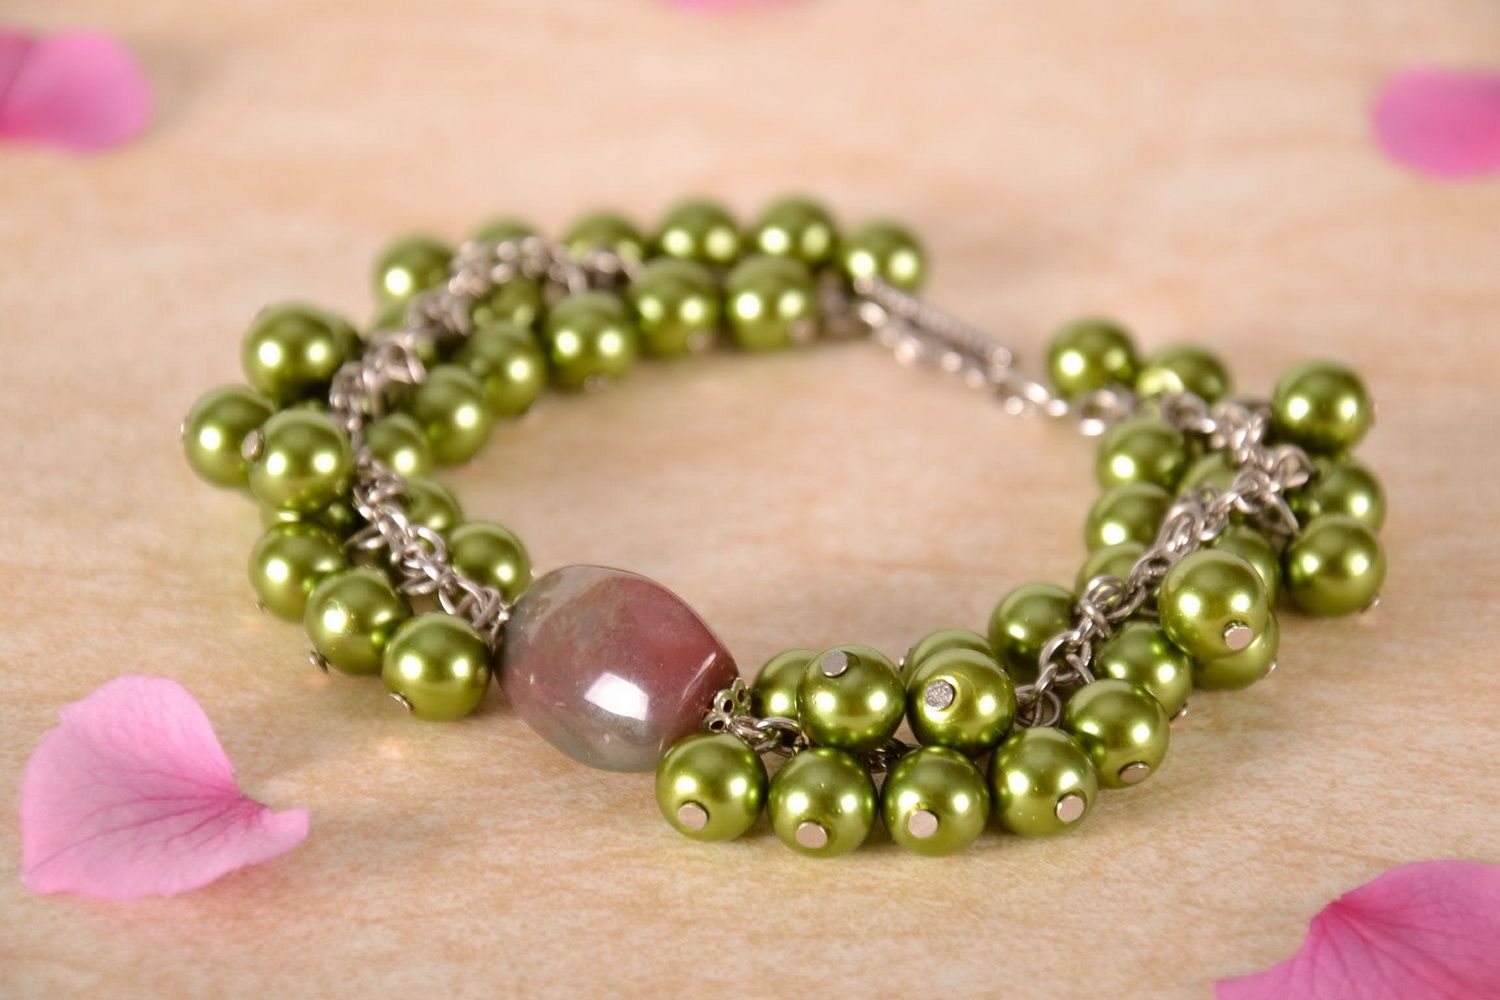 Bracelet made from ceramic pearls photo 1